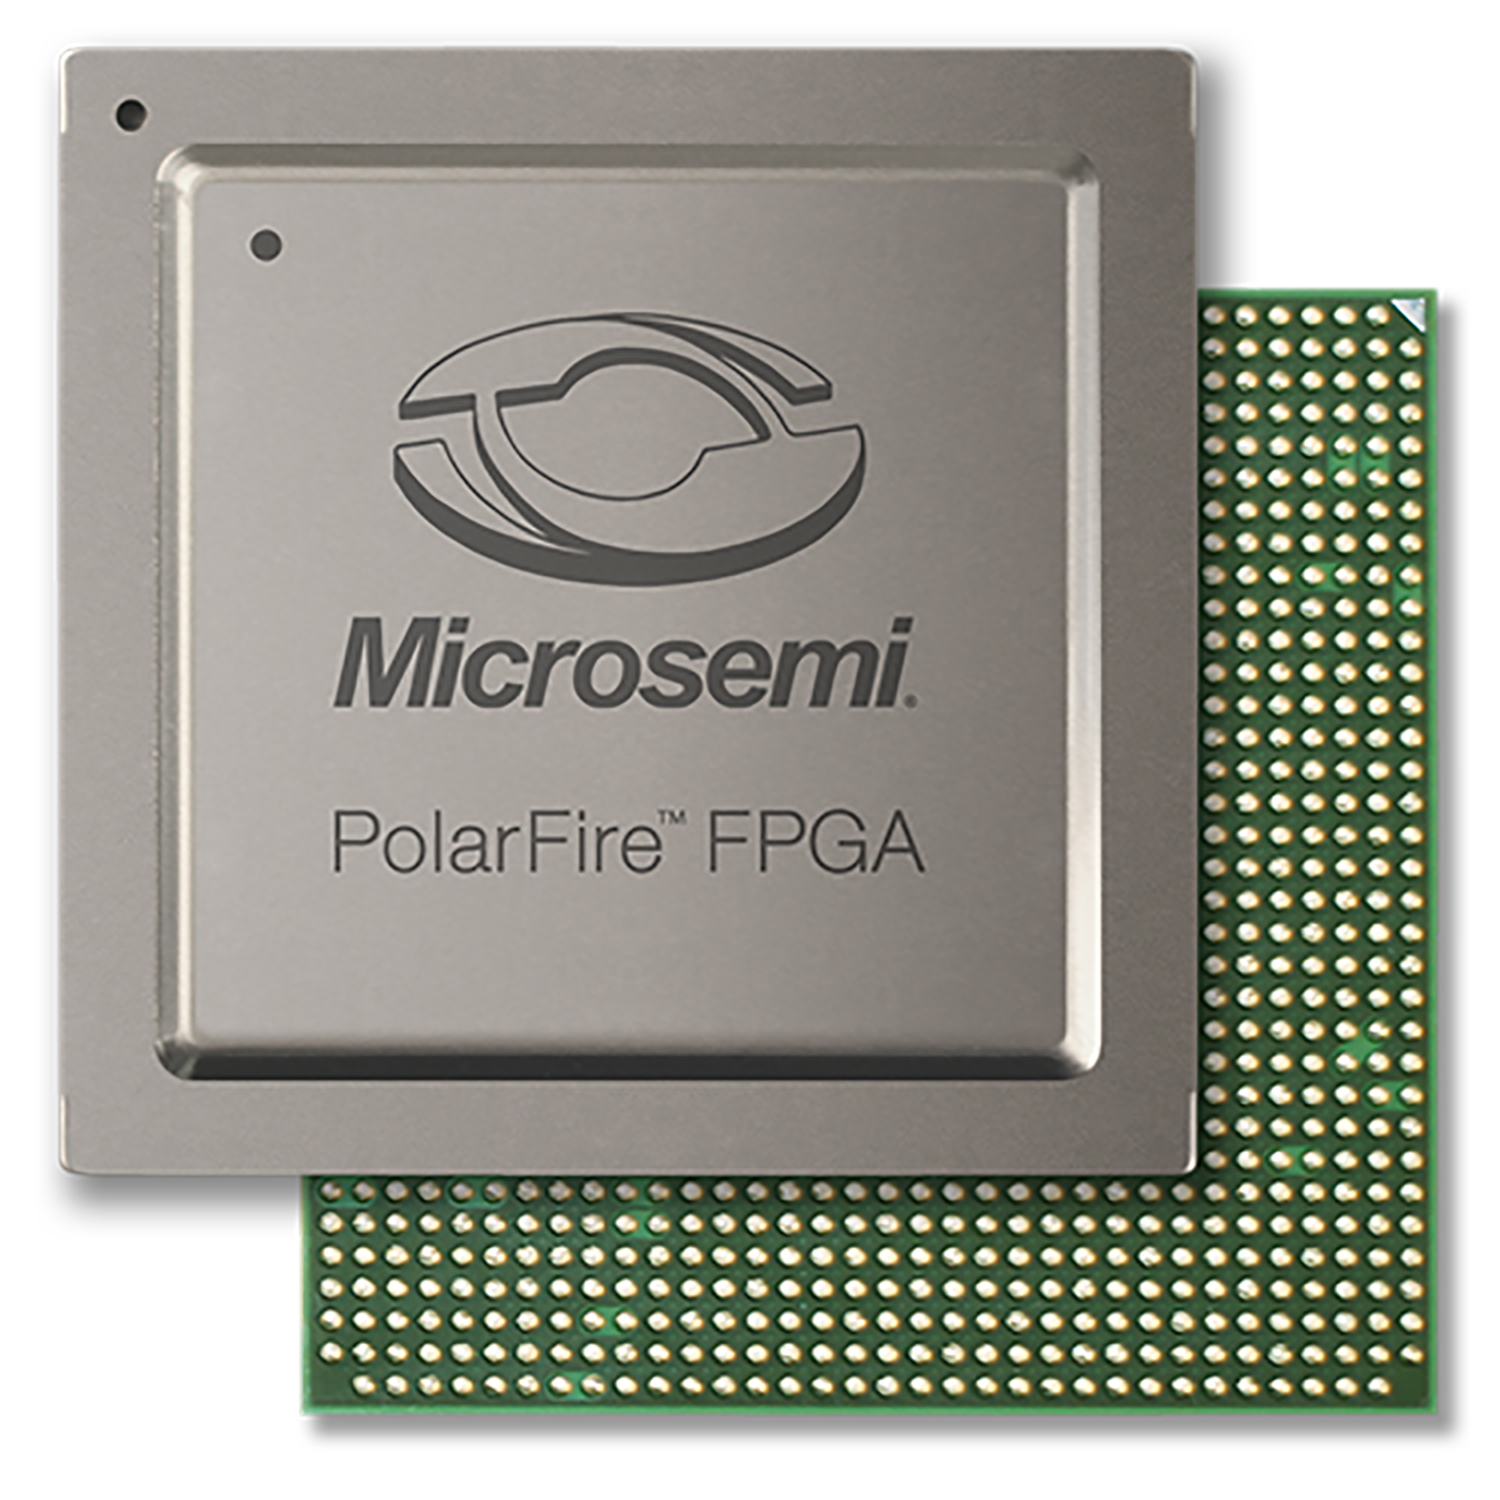 Industry's lowest power, encryption hardened FPGA provides an integrated and secure environment for connected machines